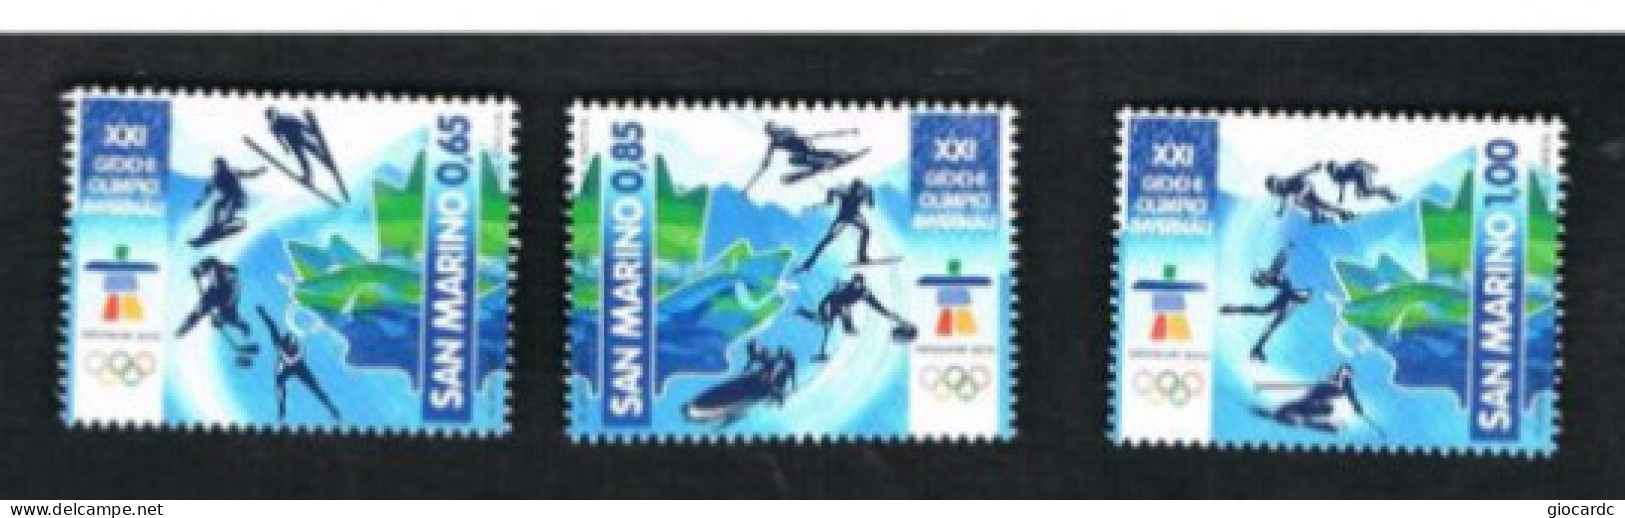 SAN MARINO - UN 2273.2275 -  2010 XXI OLIMPIADI INVERNALI A VANCOUVER (COMPLET SET OF 3 STAMPS, BY BF) - MINT** - Unused Stamps